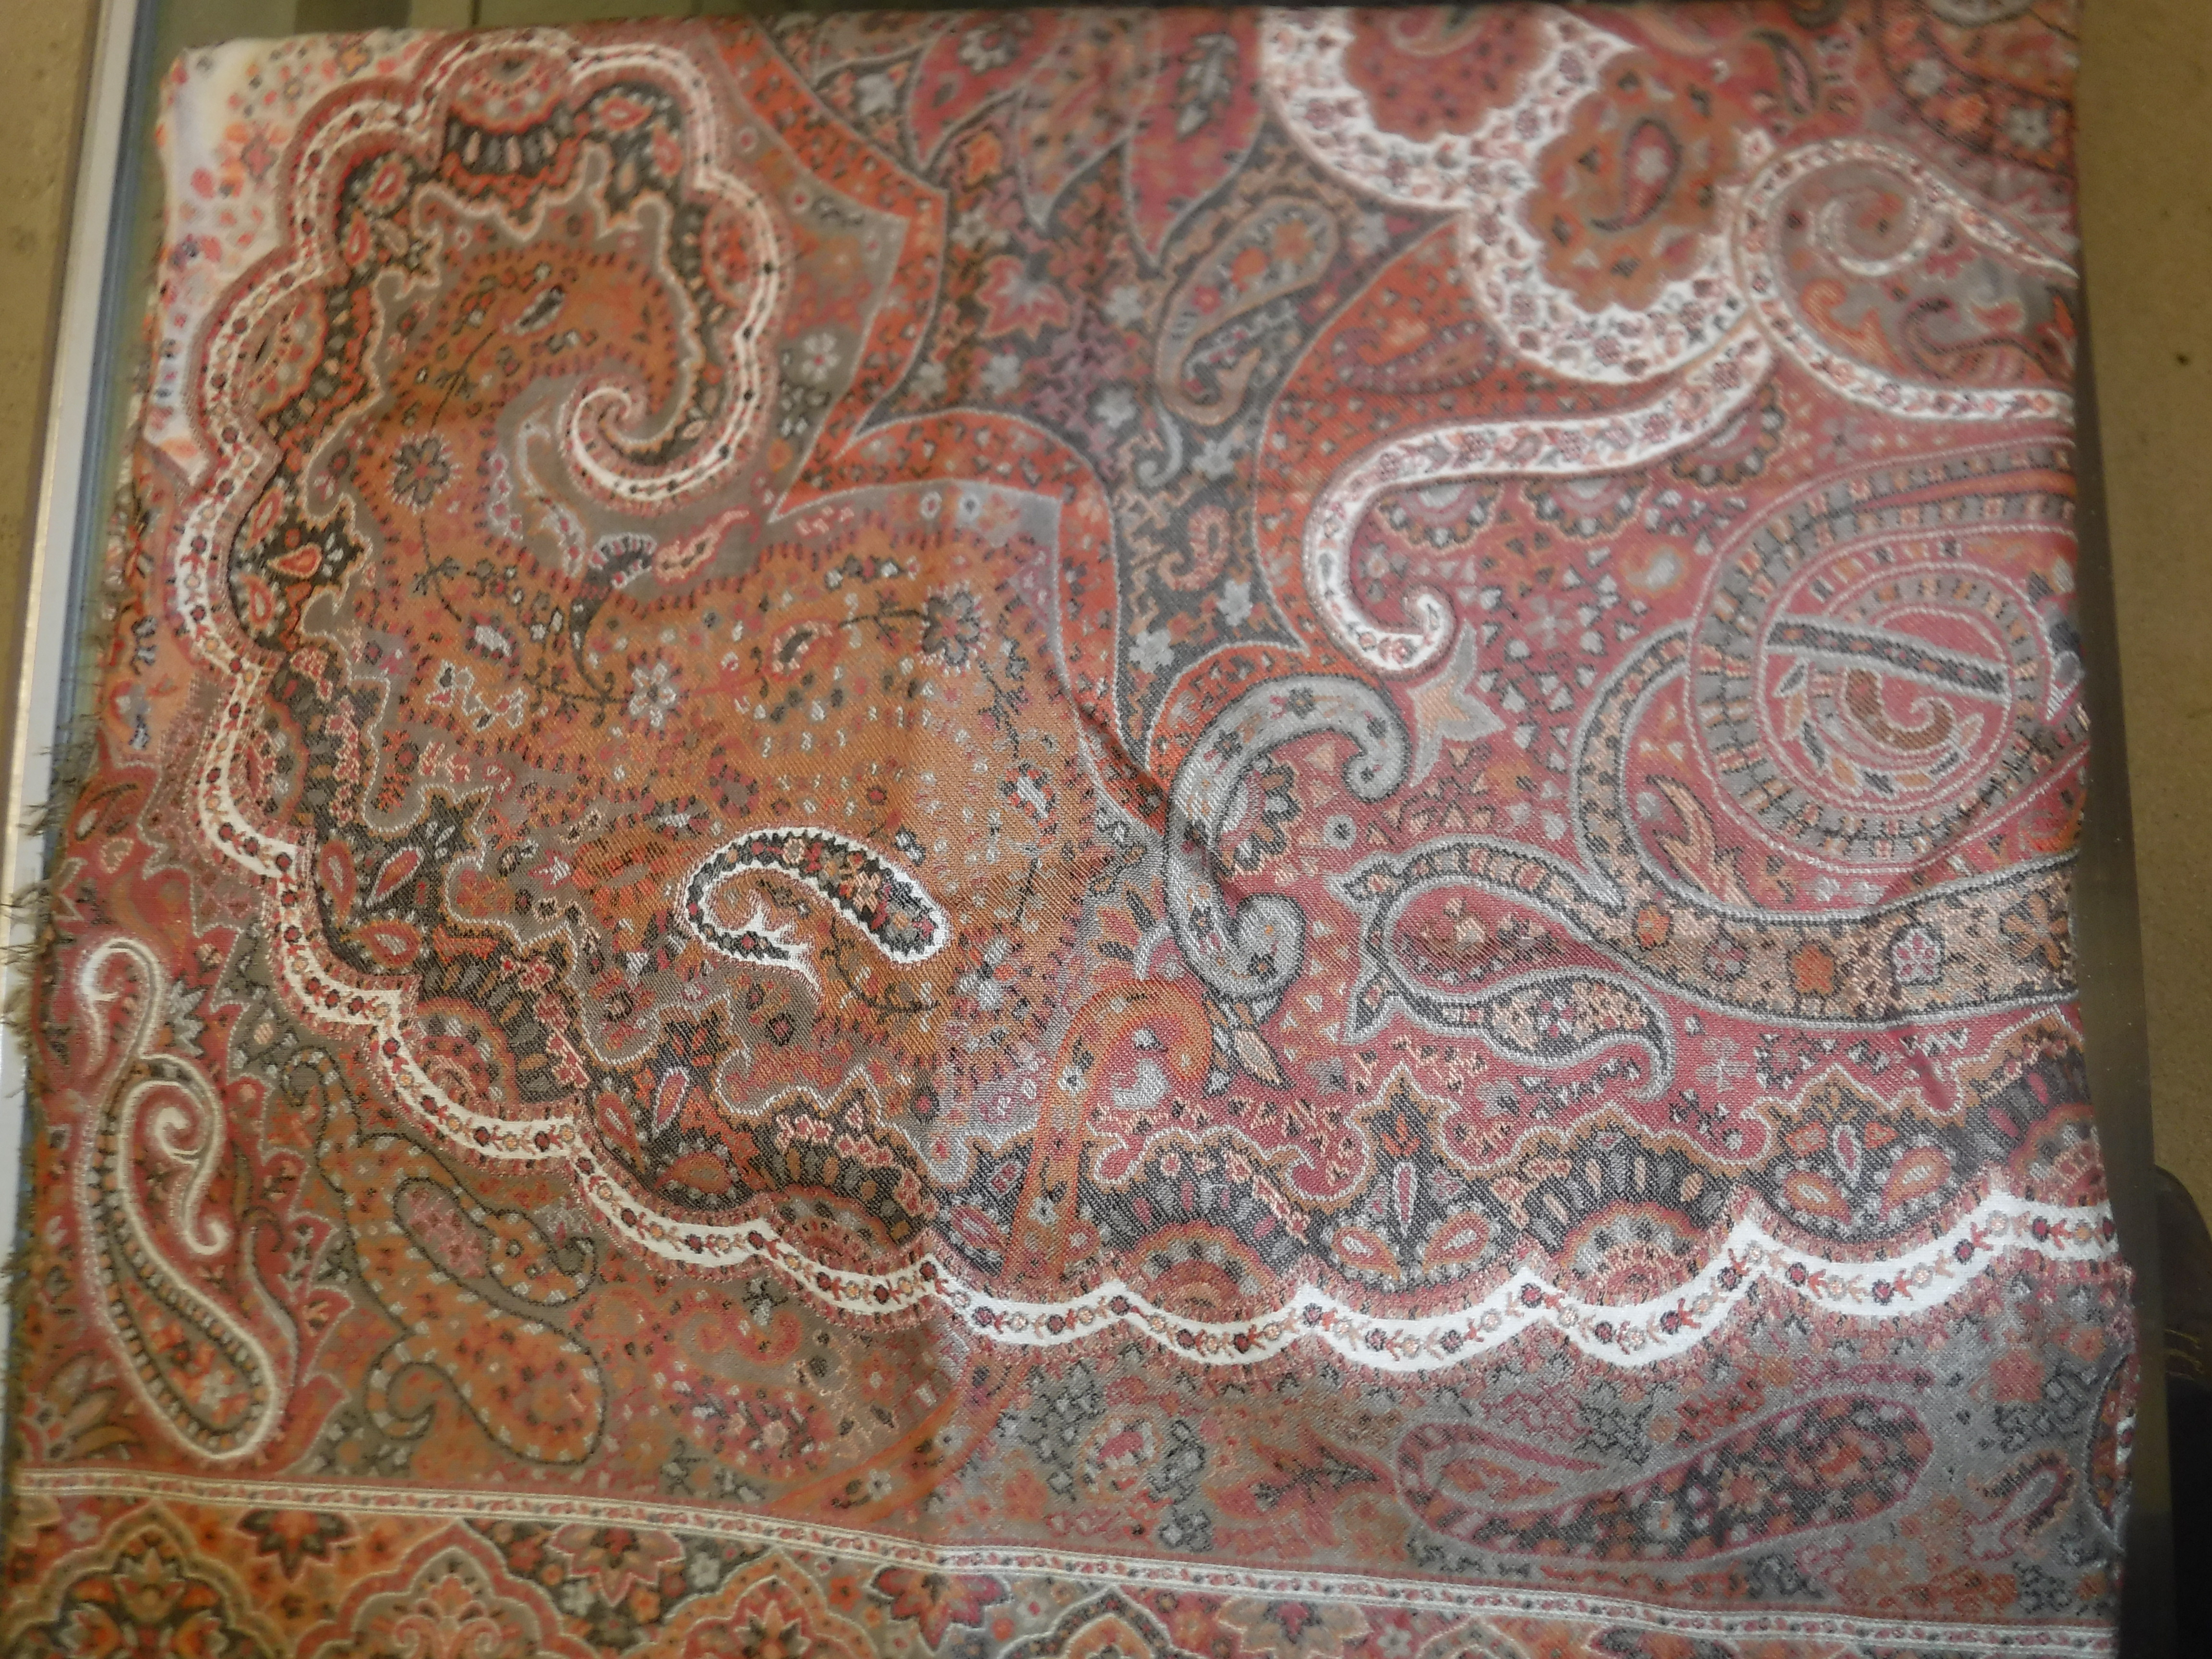 A large modern Paisley shawl or table cover in reds, oxide red, creams, fawn, etc